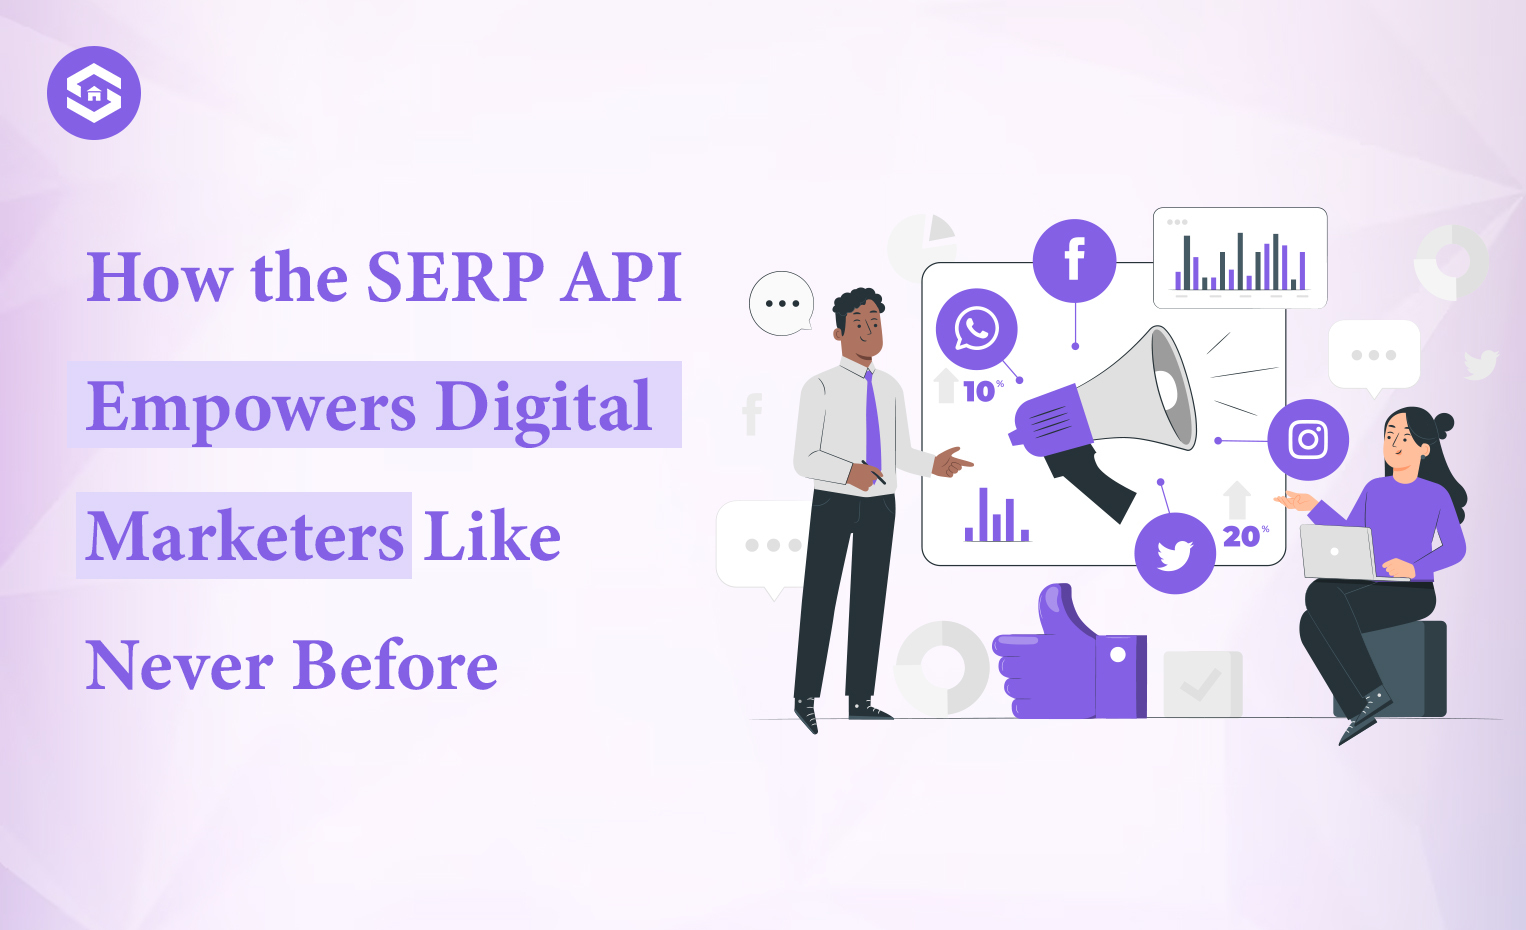 How the SERP API Becomes the Ultimate Secret Weapon for Digital Marketers